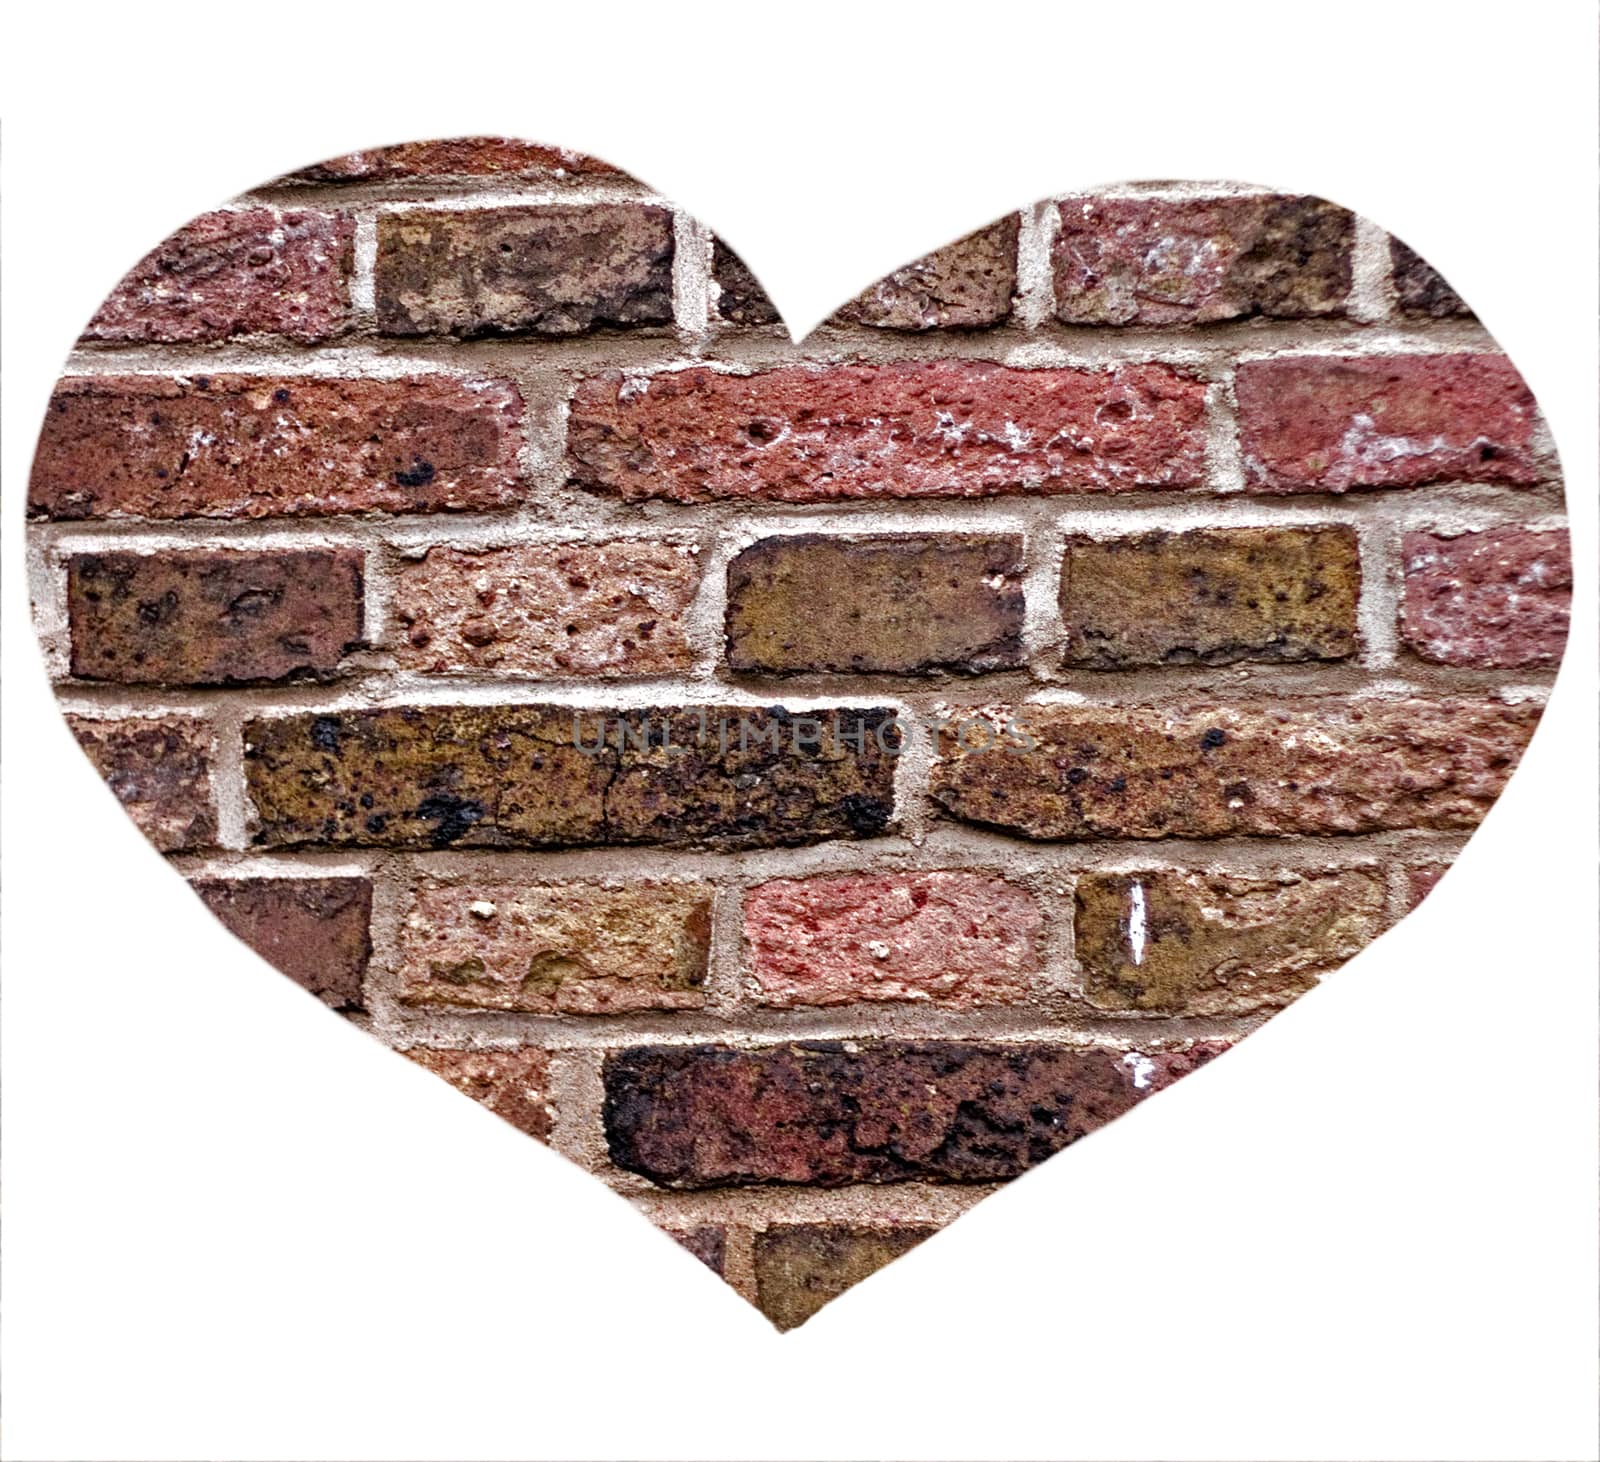 Decorative heart brick wall vintage isolated on white background